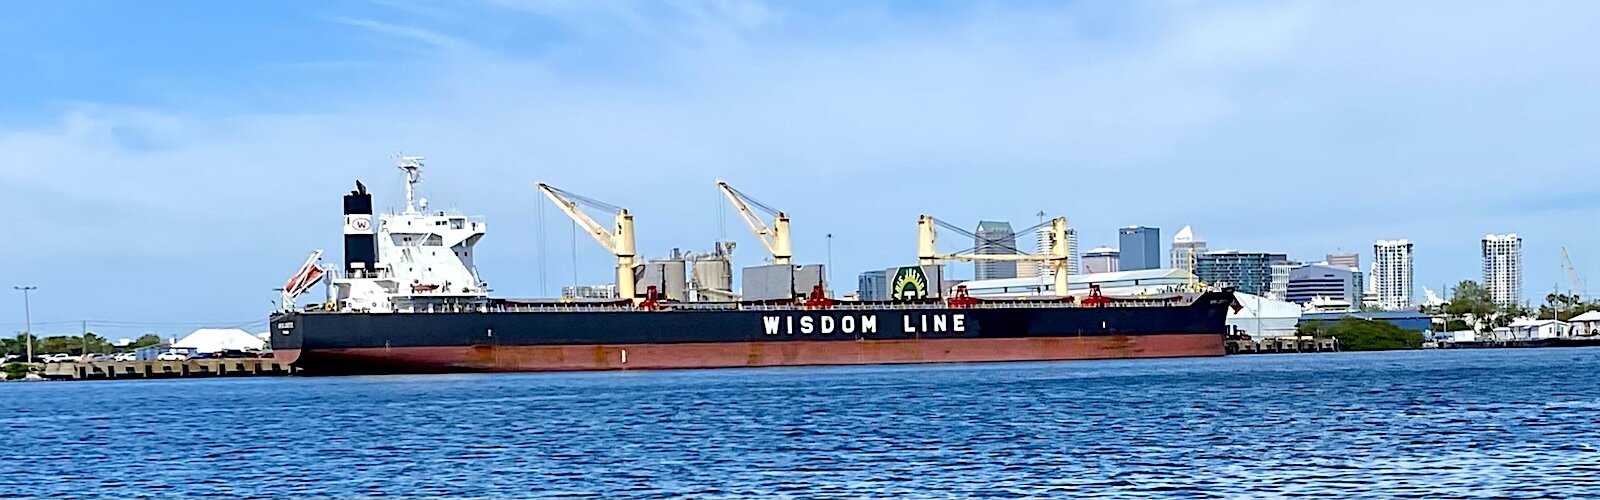 Wisdom Marine Lines, a Taiwanese shipping company, transports freight on bulk carriers to ports around the world, including Port Tampa Bay.